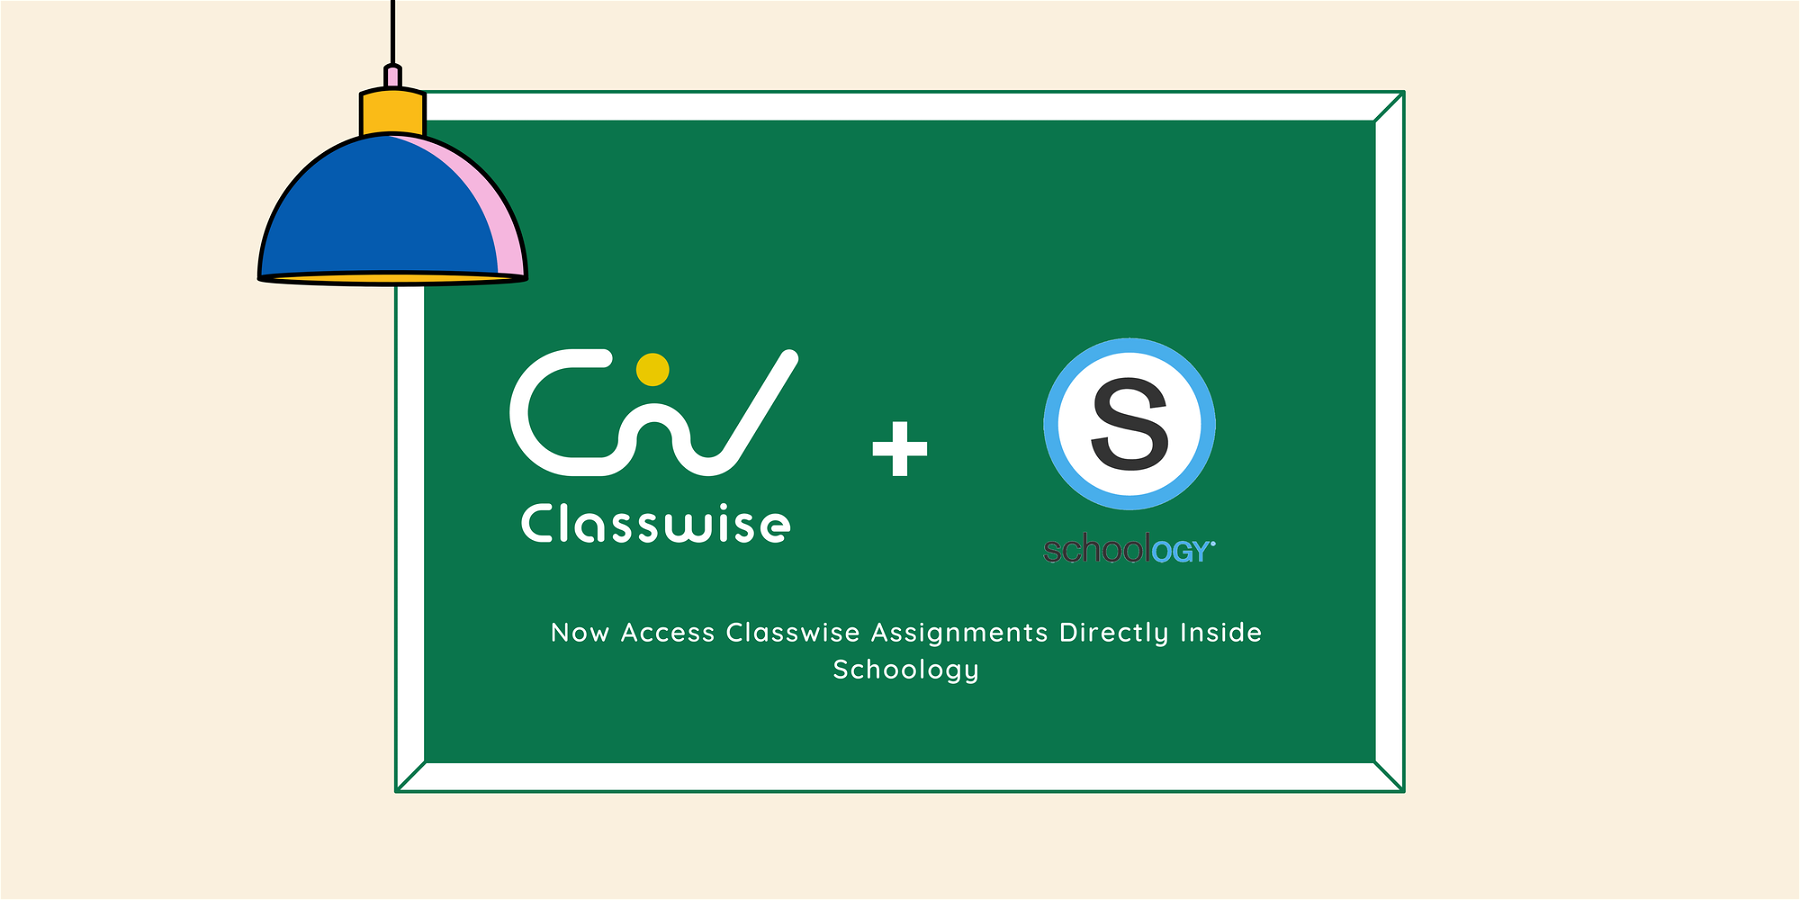 Classwise Integration with Schoology – Now Access Classwise Directly Inside Schoology!